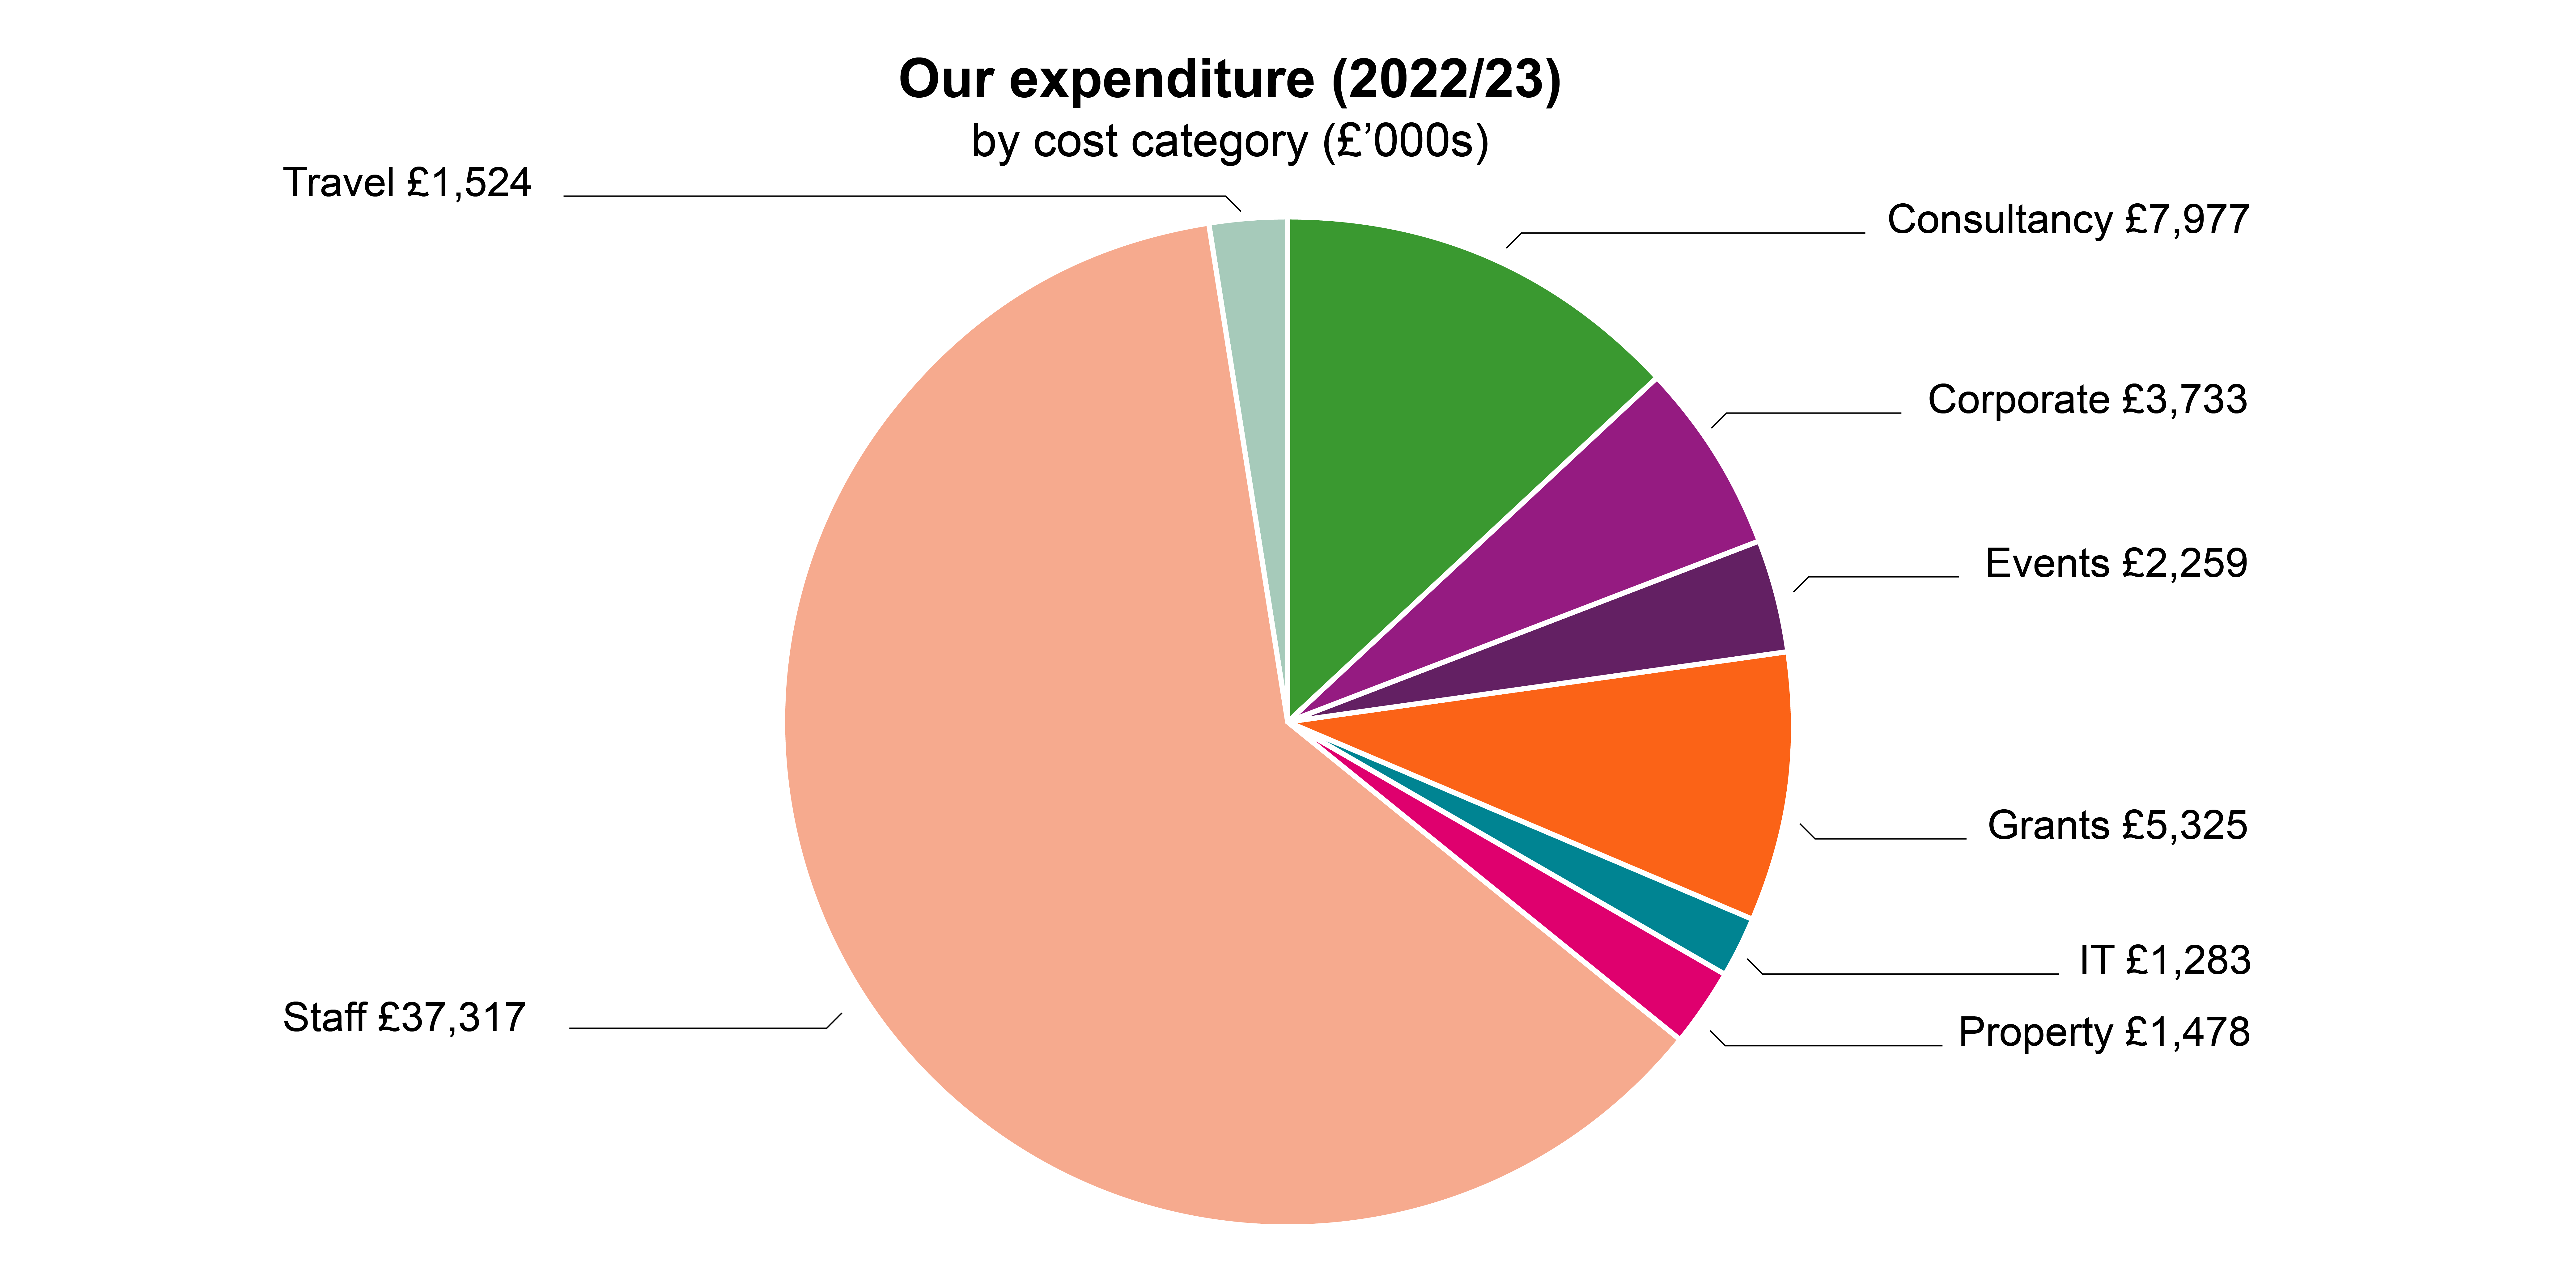 A pie chart showing the LGA's expenditure by cost category